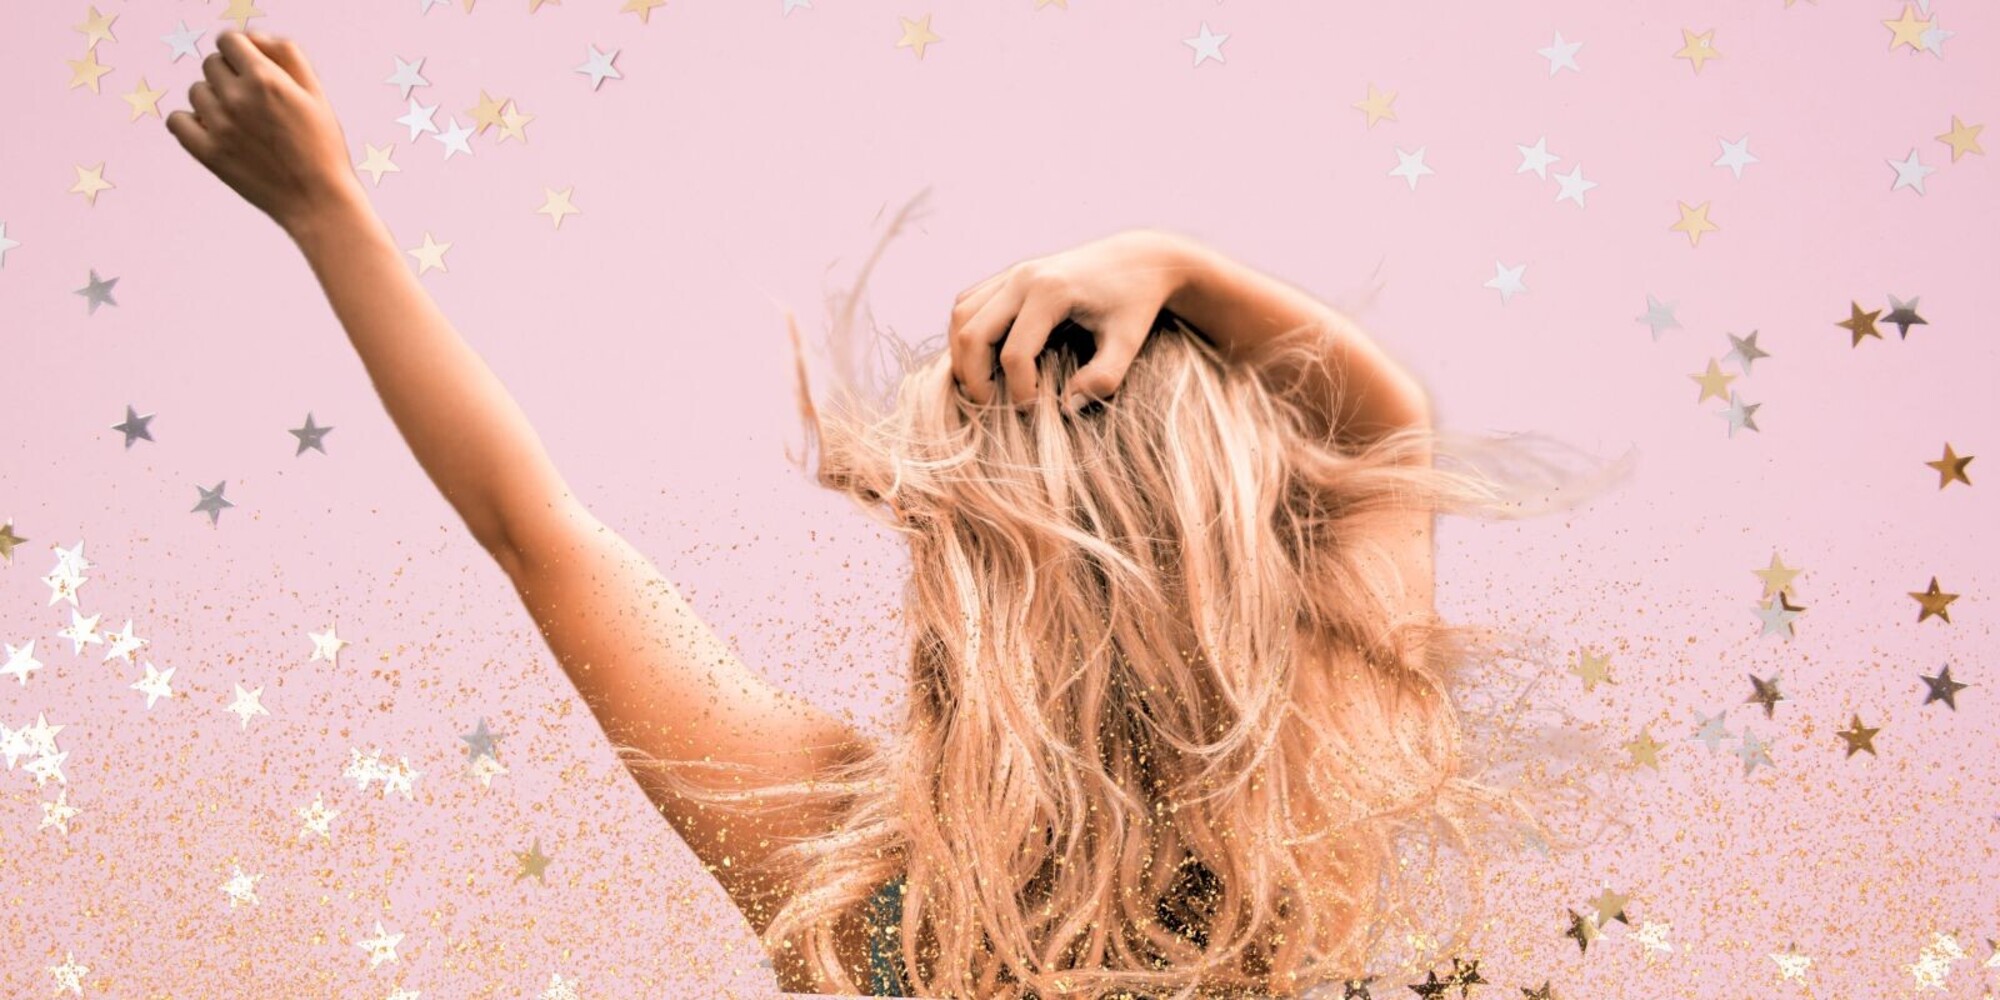 Woman with blonde hair on a pale pink background with gold and silver stars and glitter